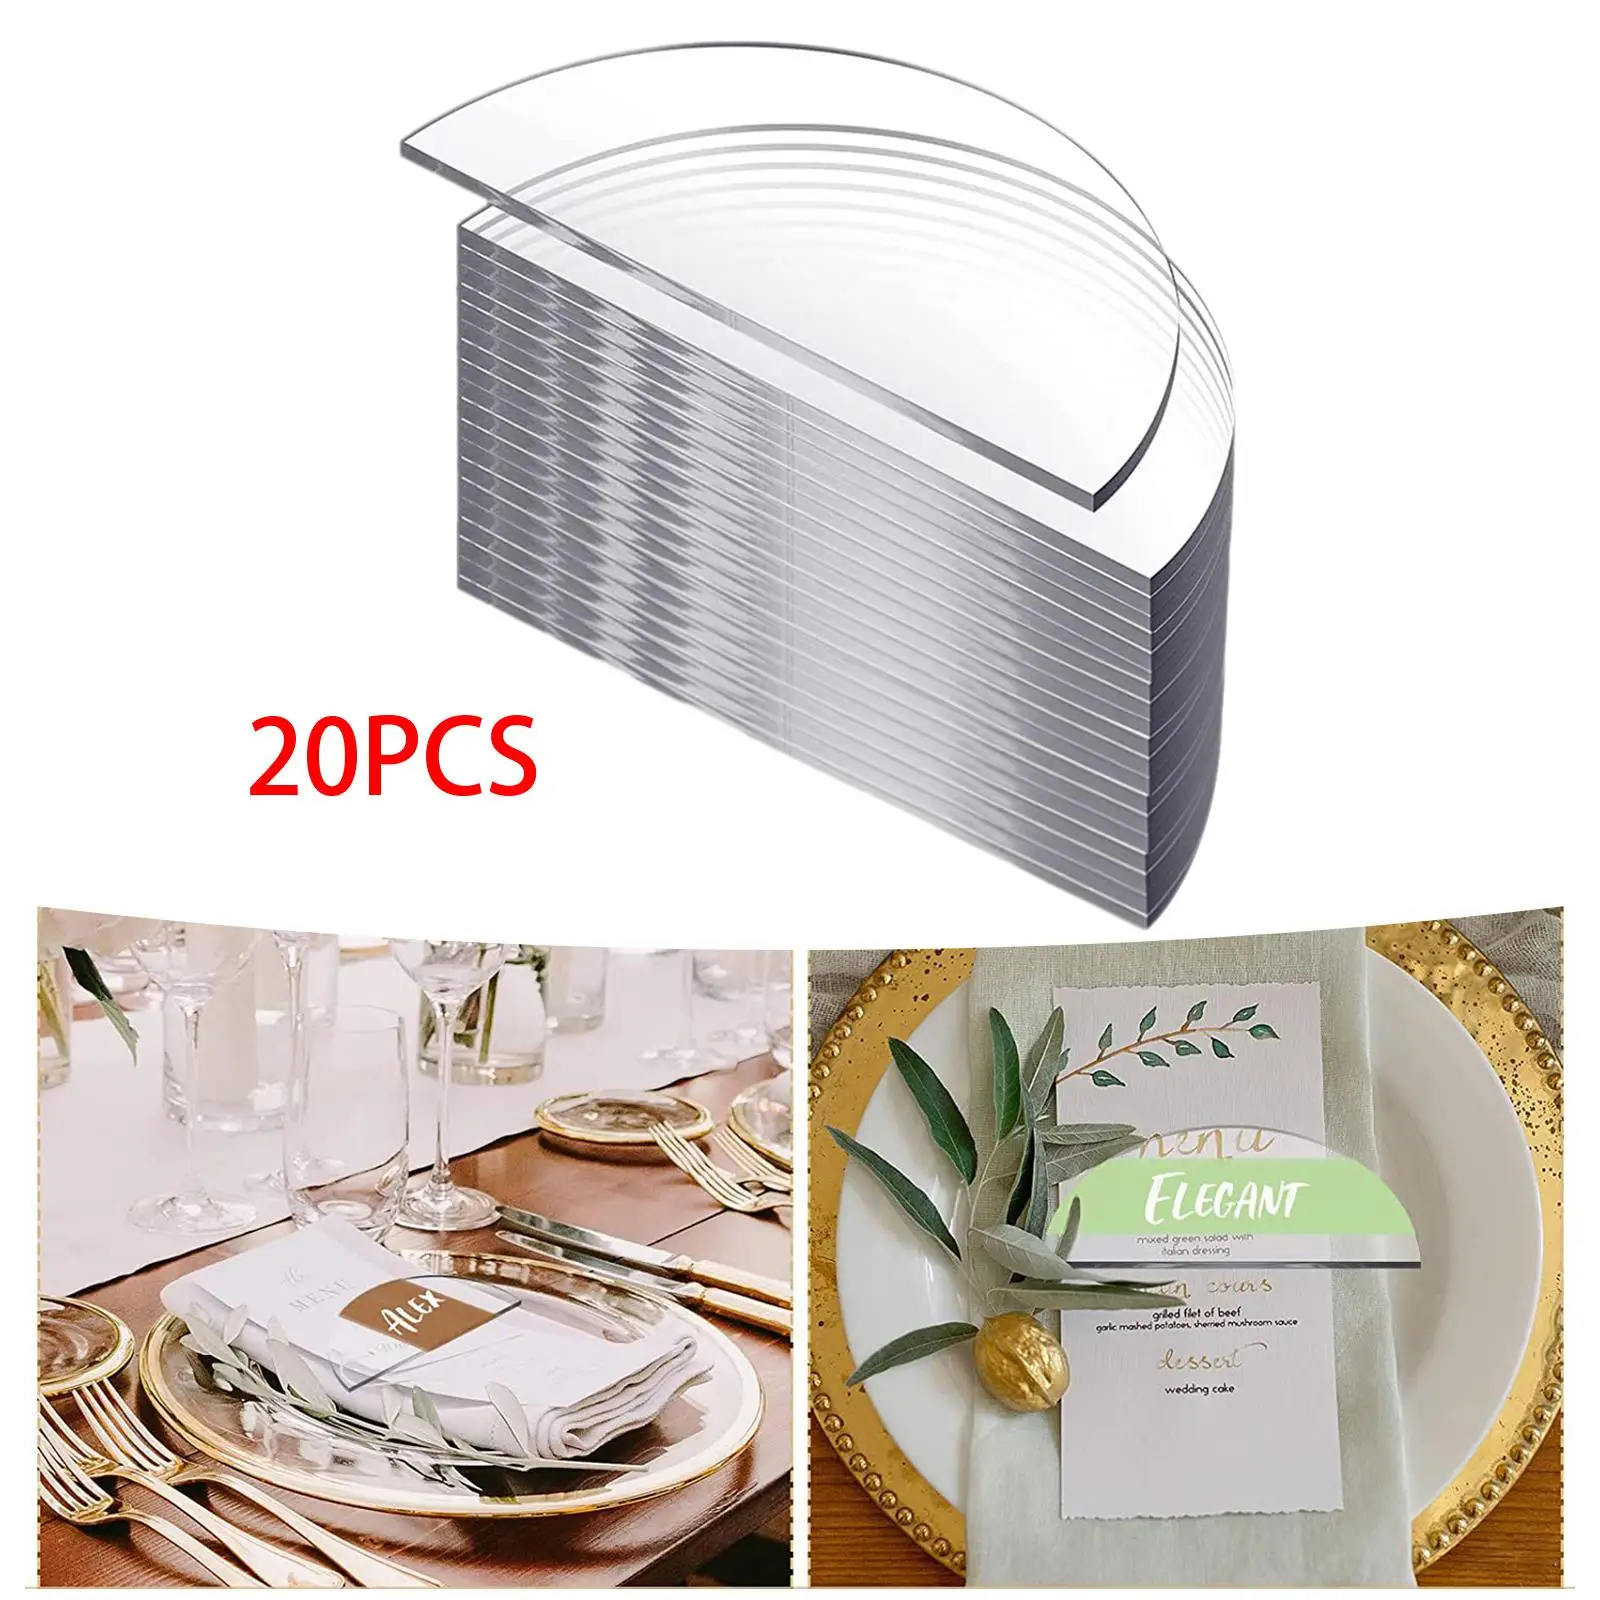 20Pcs Clear Acrylic Place Cards Guest Names Signs Display Arched Reserved Decor for Wedding Banquet Restaurant Dinner Reception